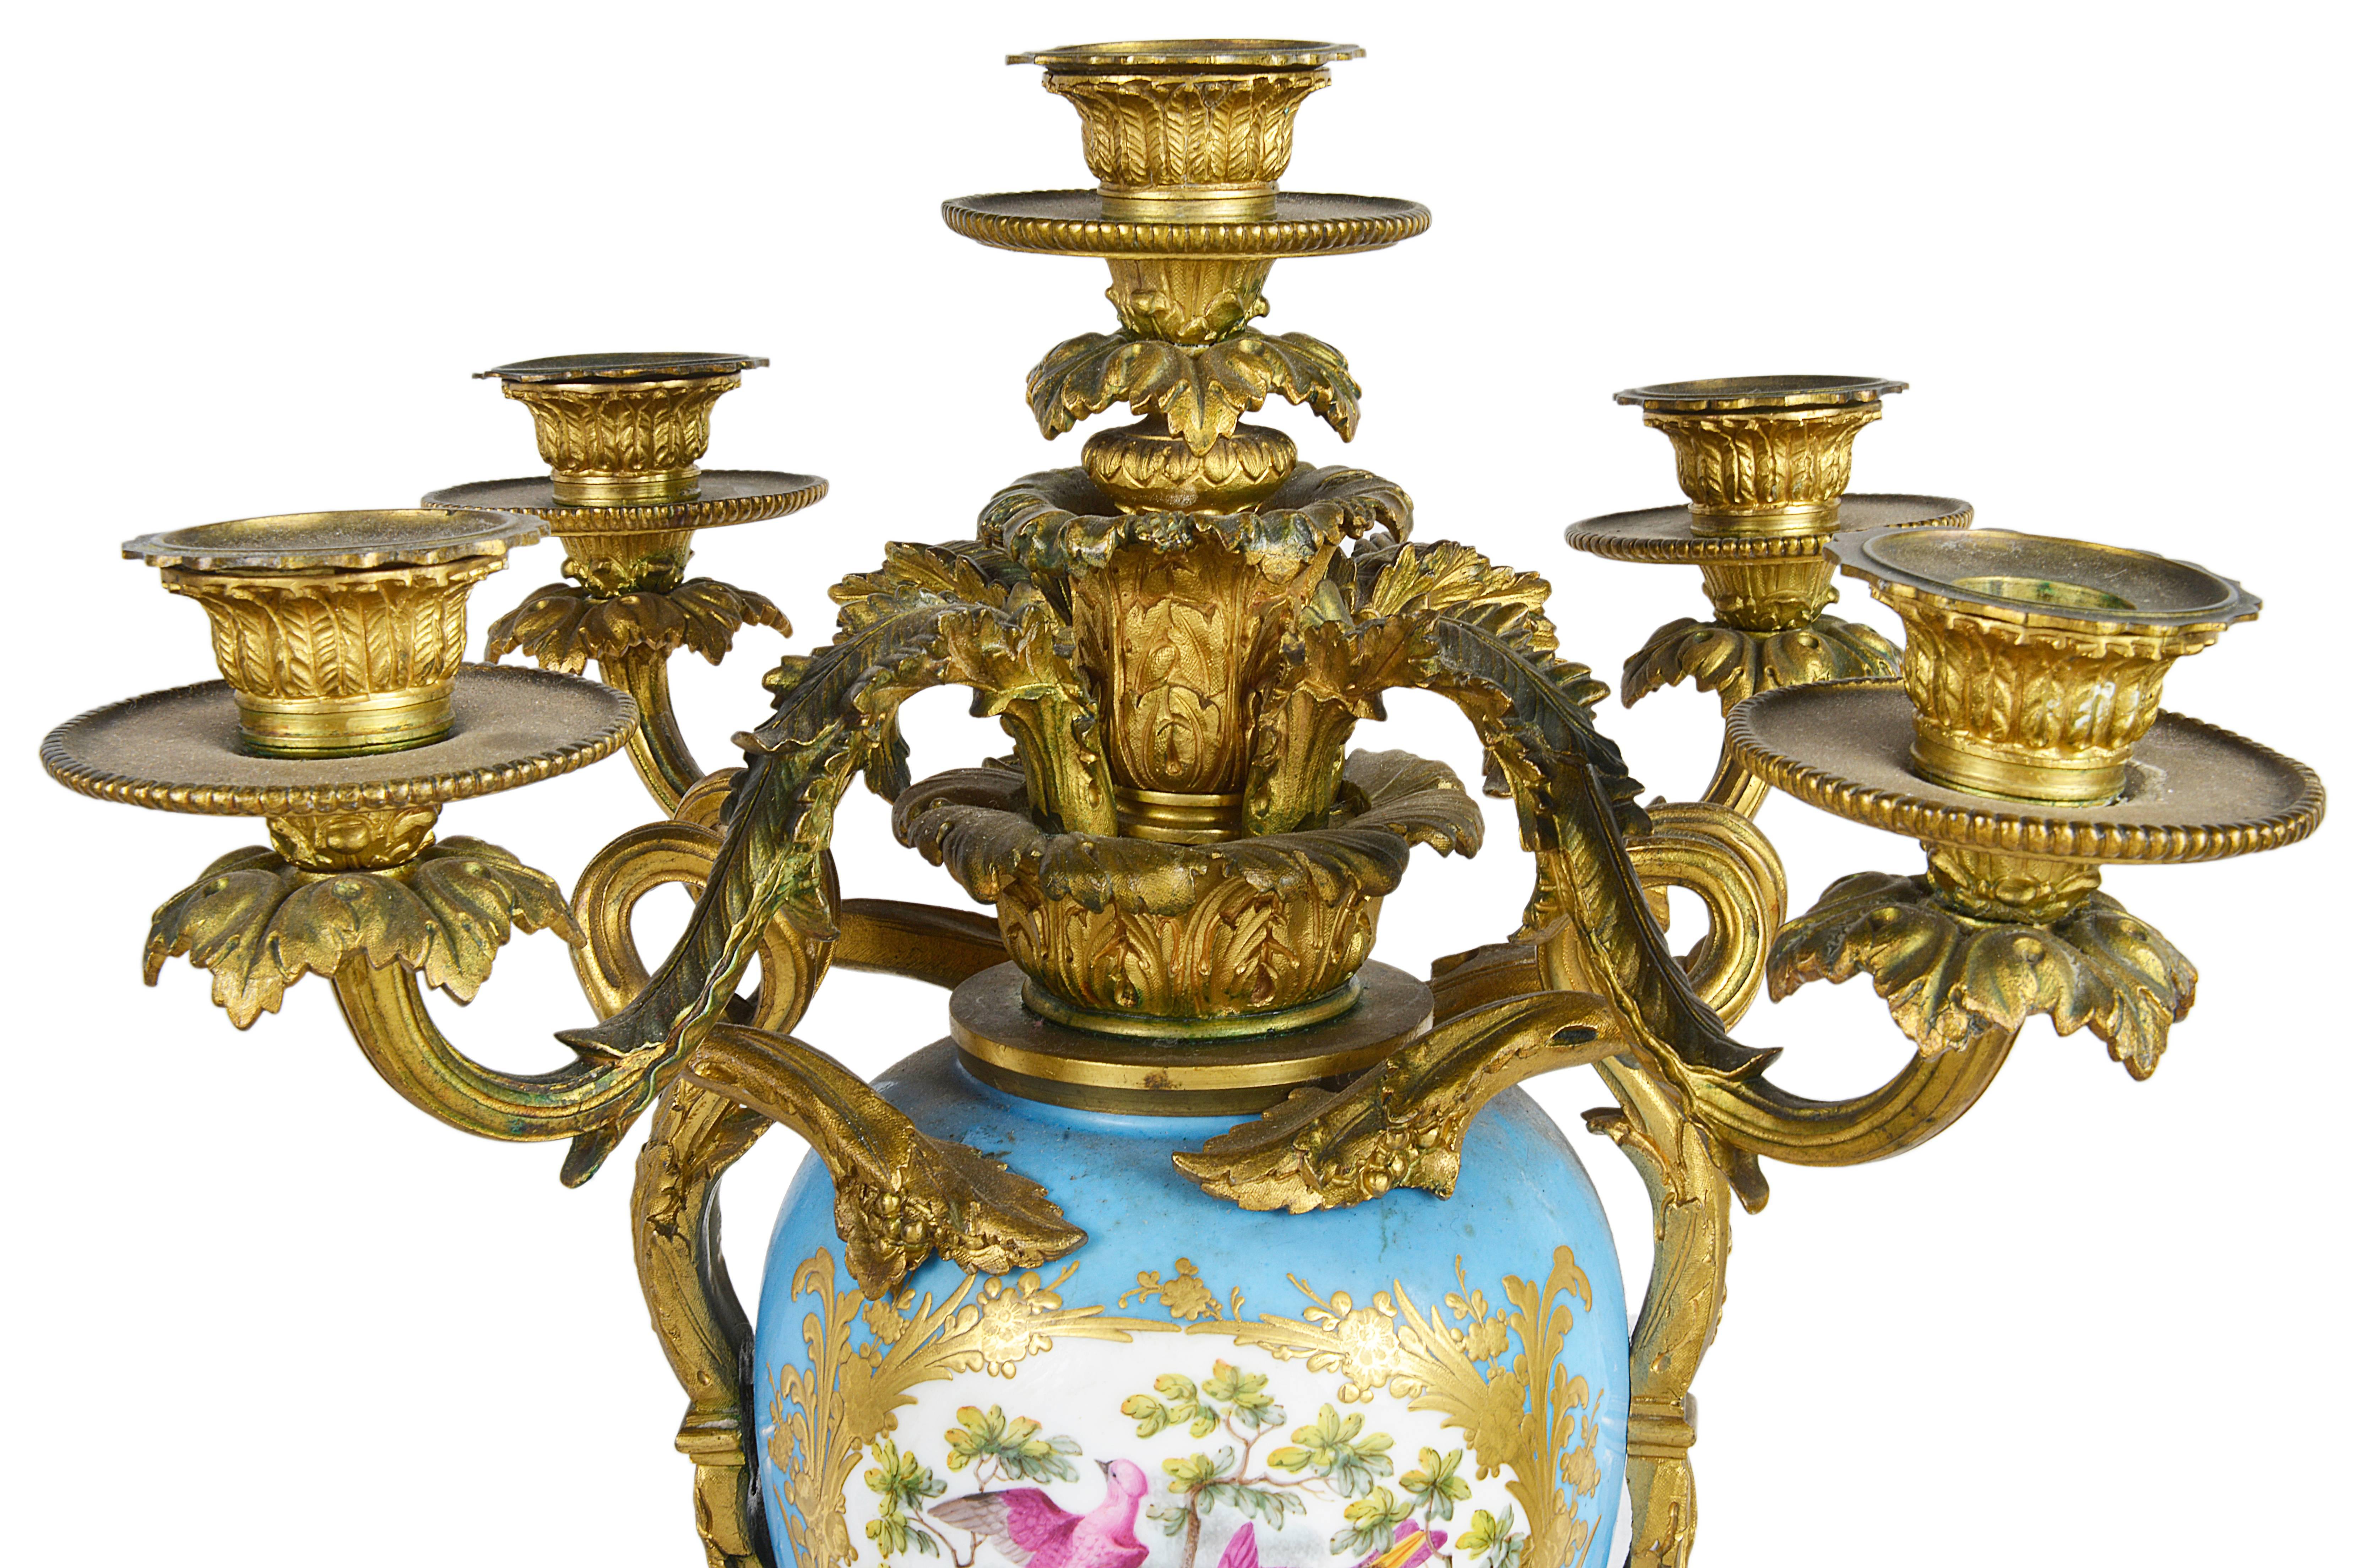 19th Century Large Pair of Antique Sevres Candelabra For Sale